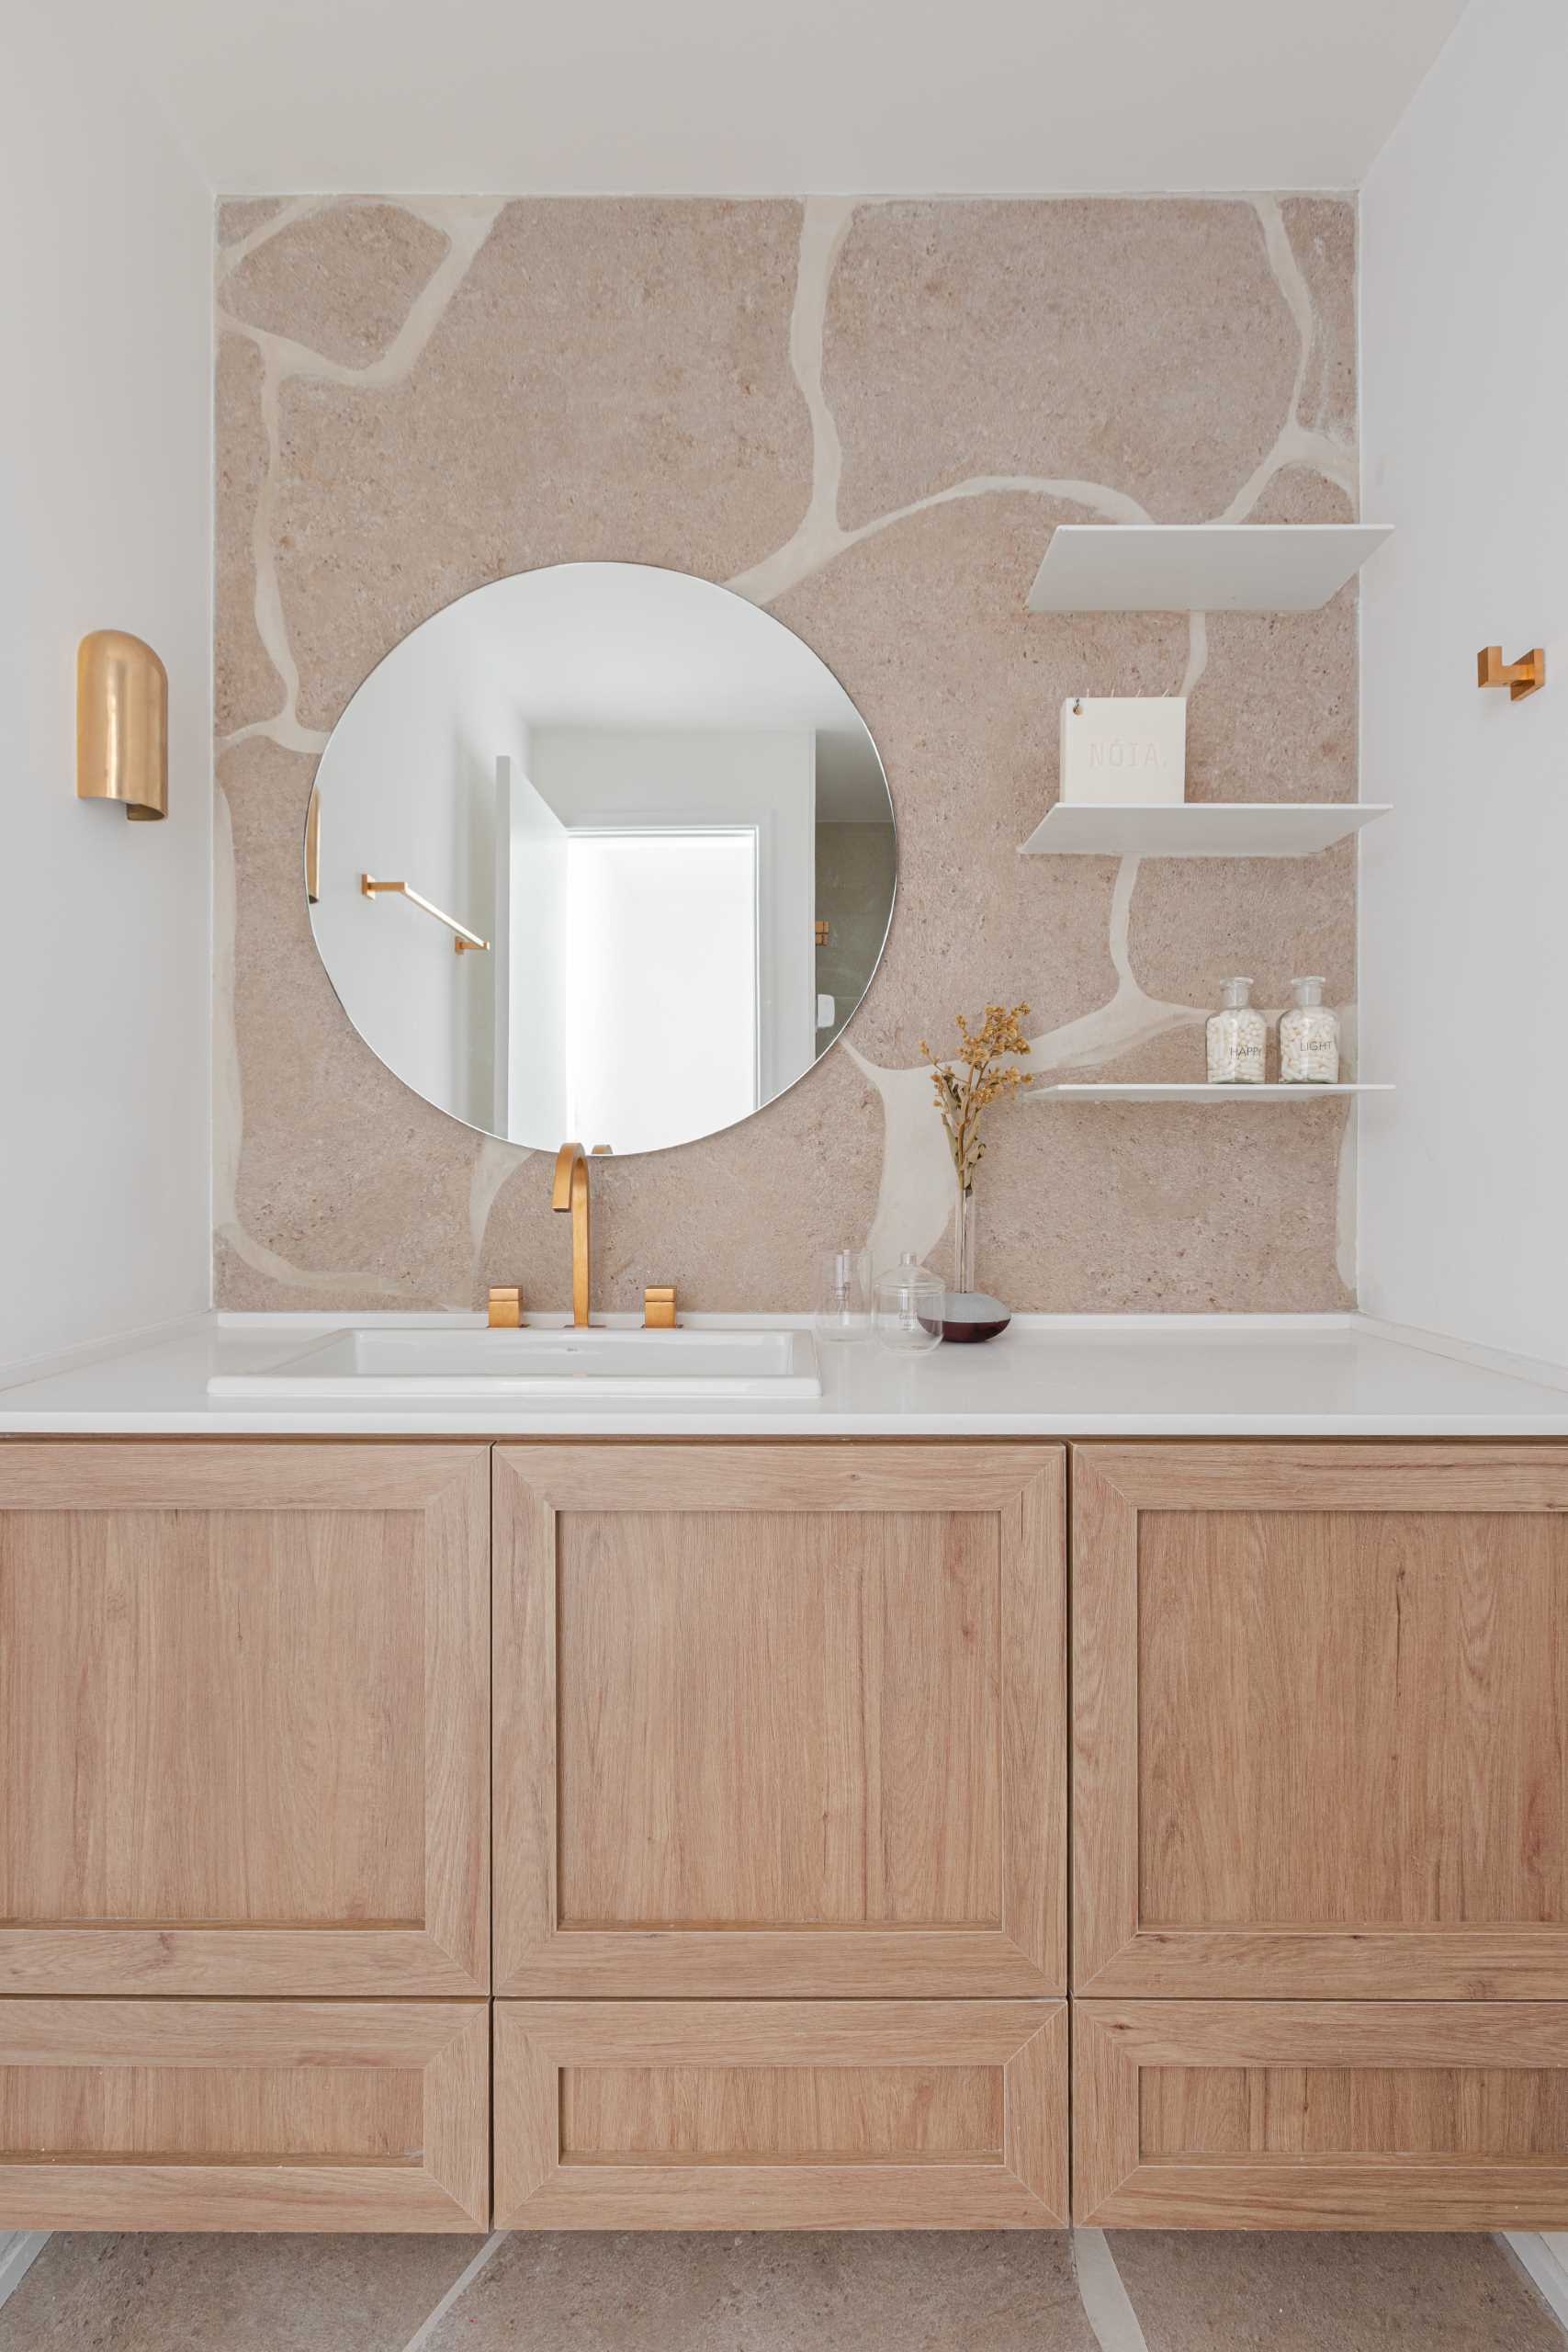 A modern bathroom has a neutral color palette with a wood vanity, a white countertop, and floating shelves.